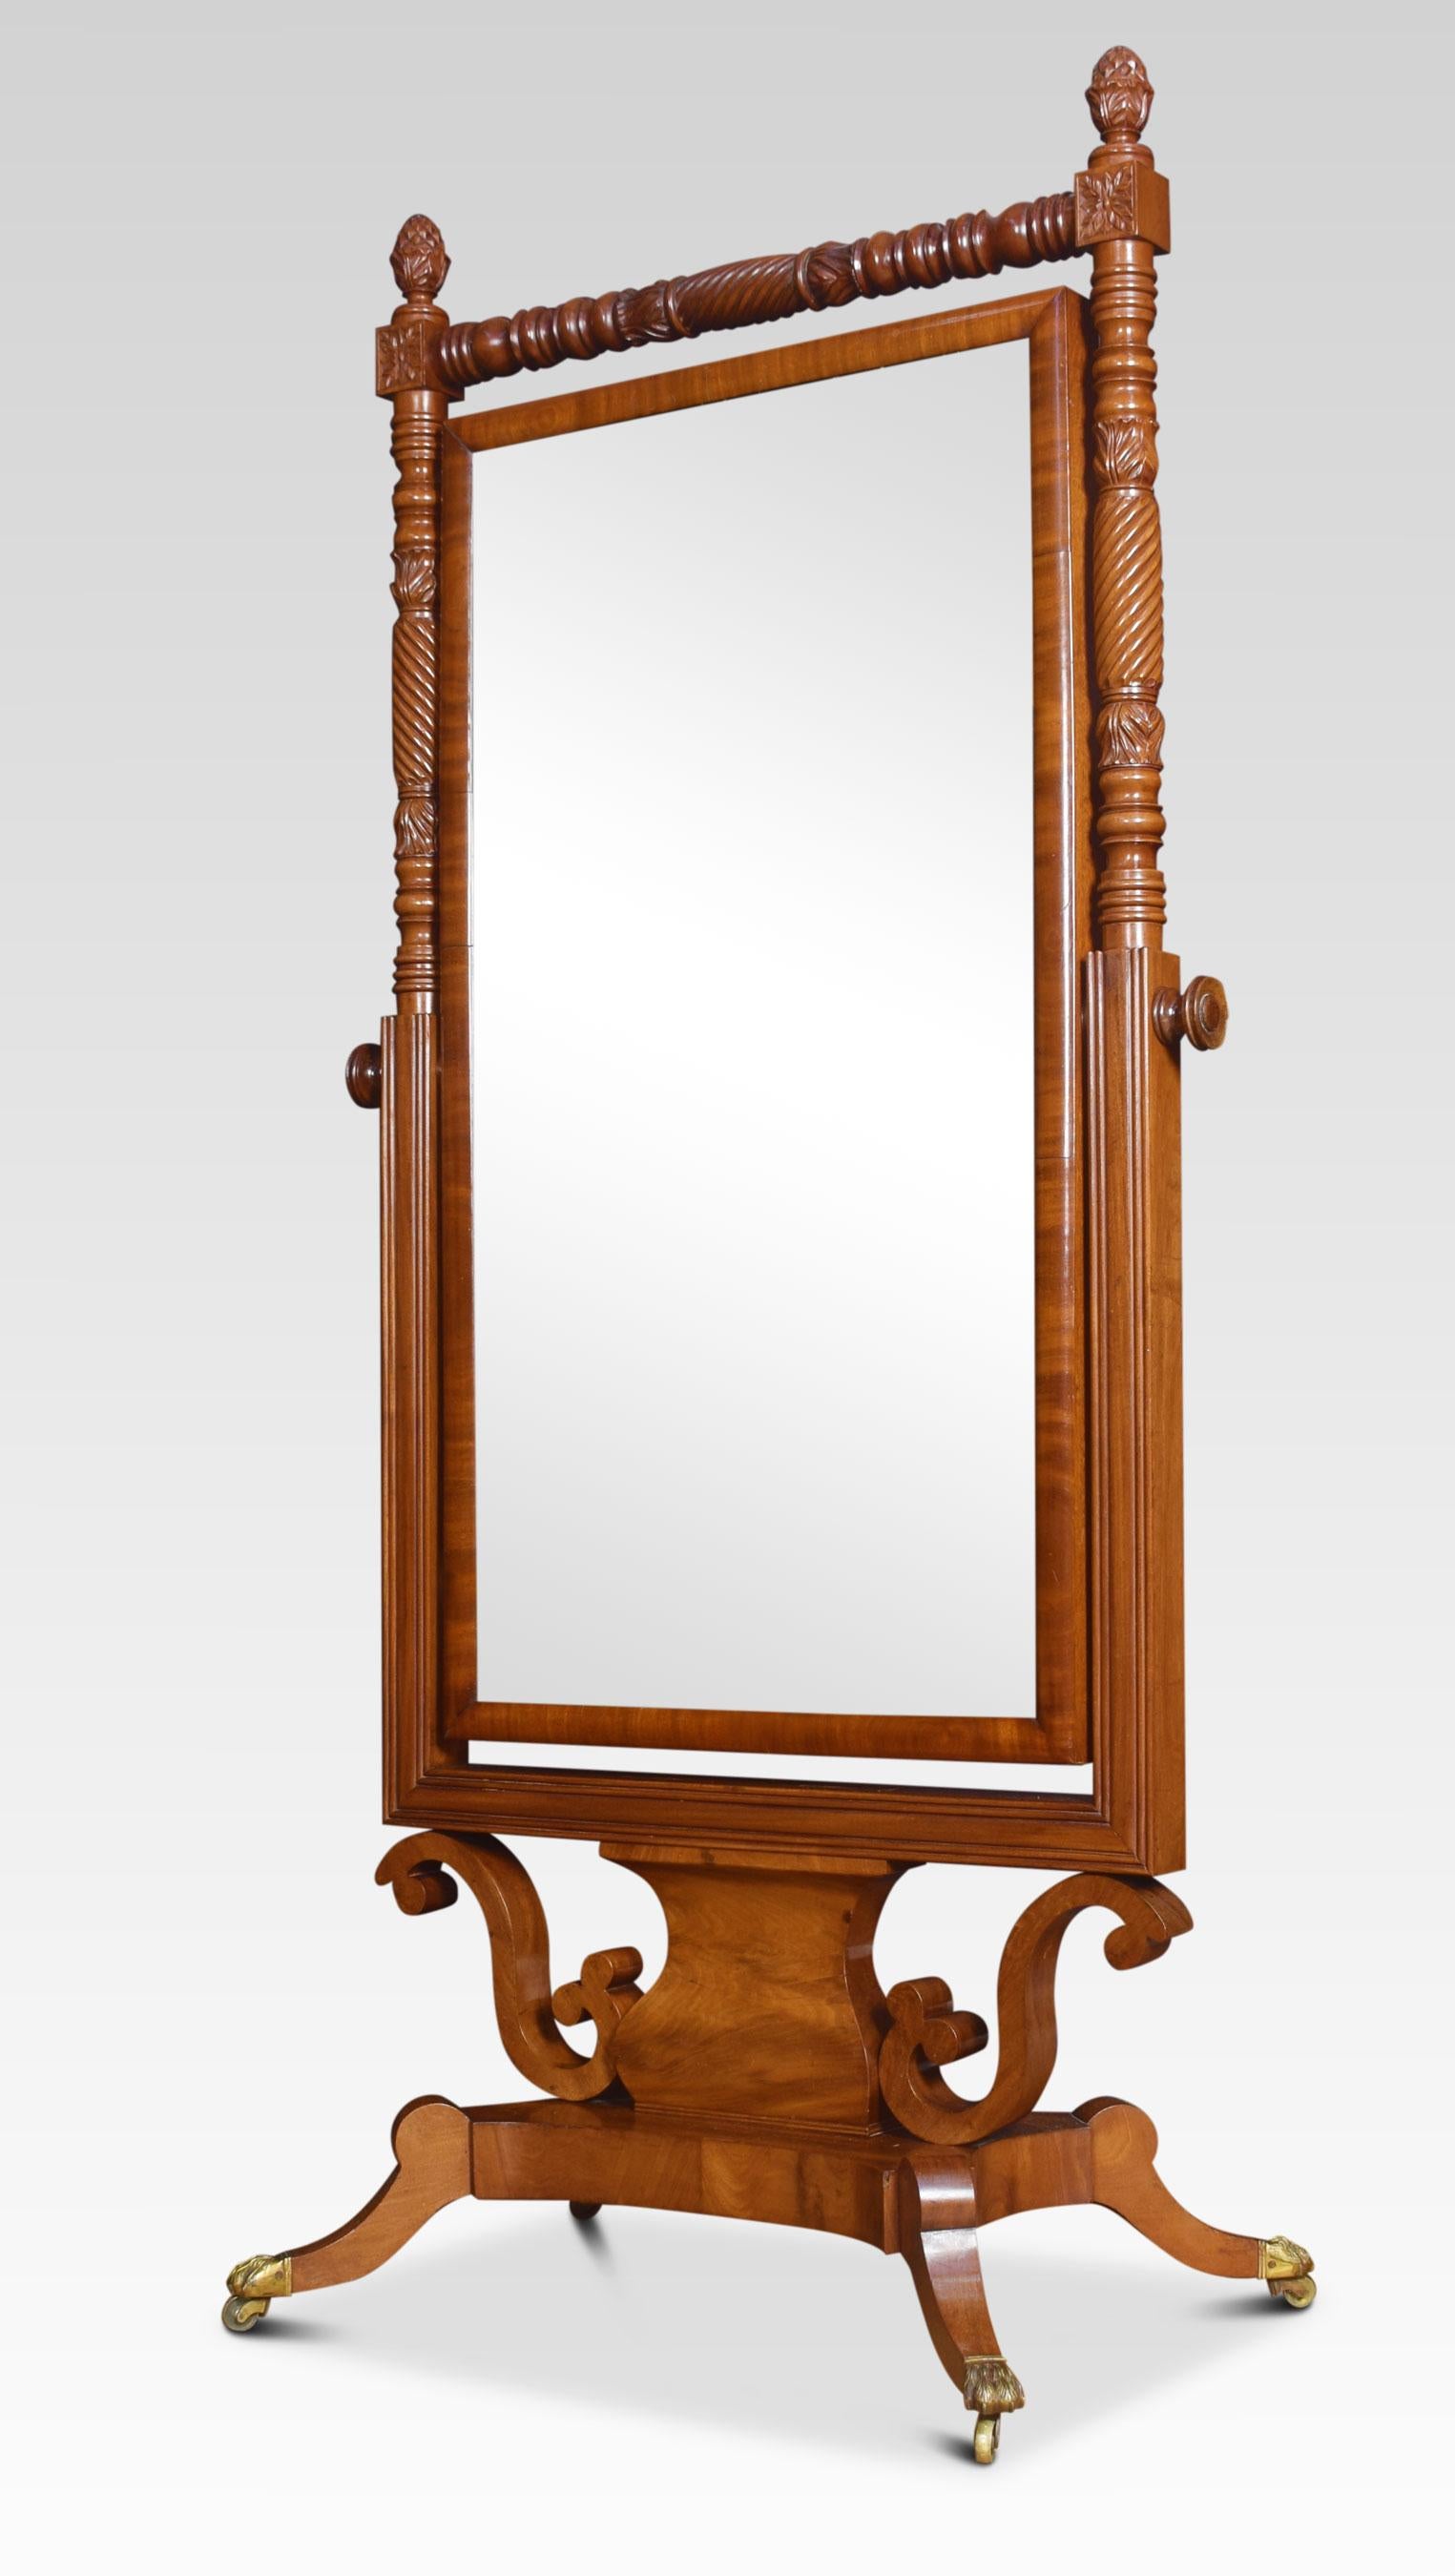 Regency mahogany cheval. The original mirror plate within a cross-banded frame, between ring turned and spiral column supports on a raised platform base with splayed legs and lion’s paw castors.
Dimensions:
Height 69 inches
Width 32 inches
Depth